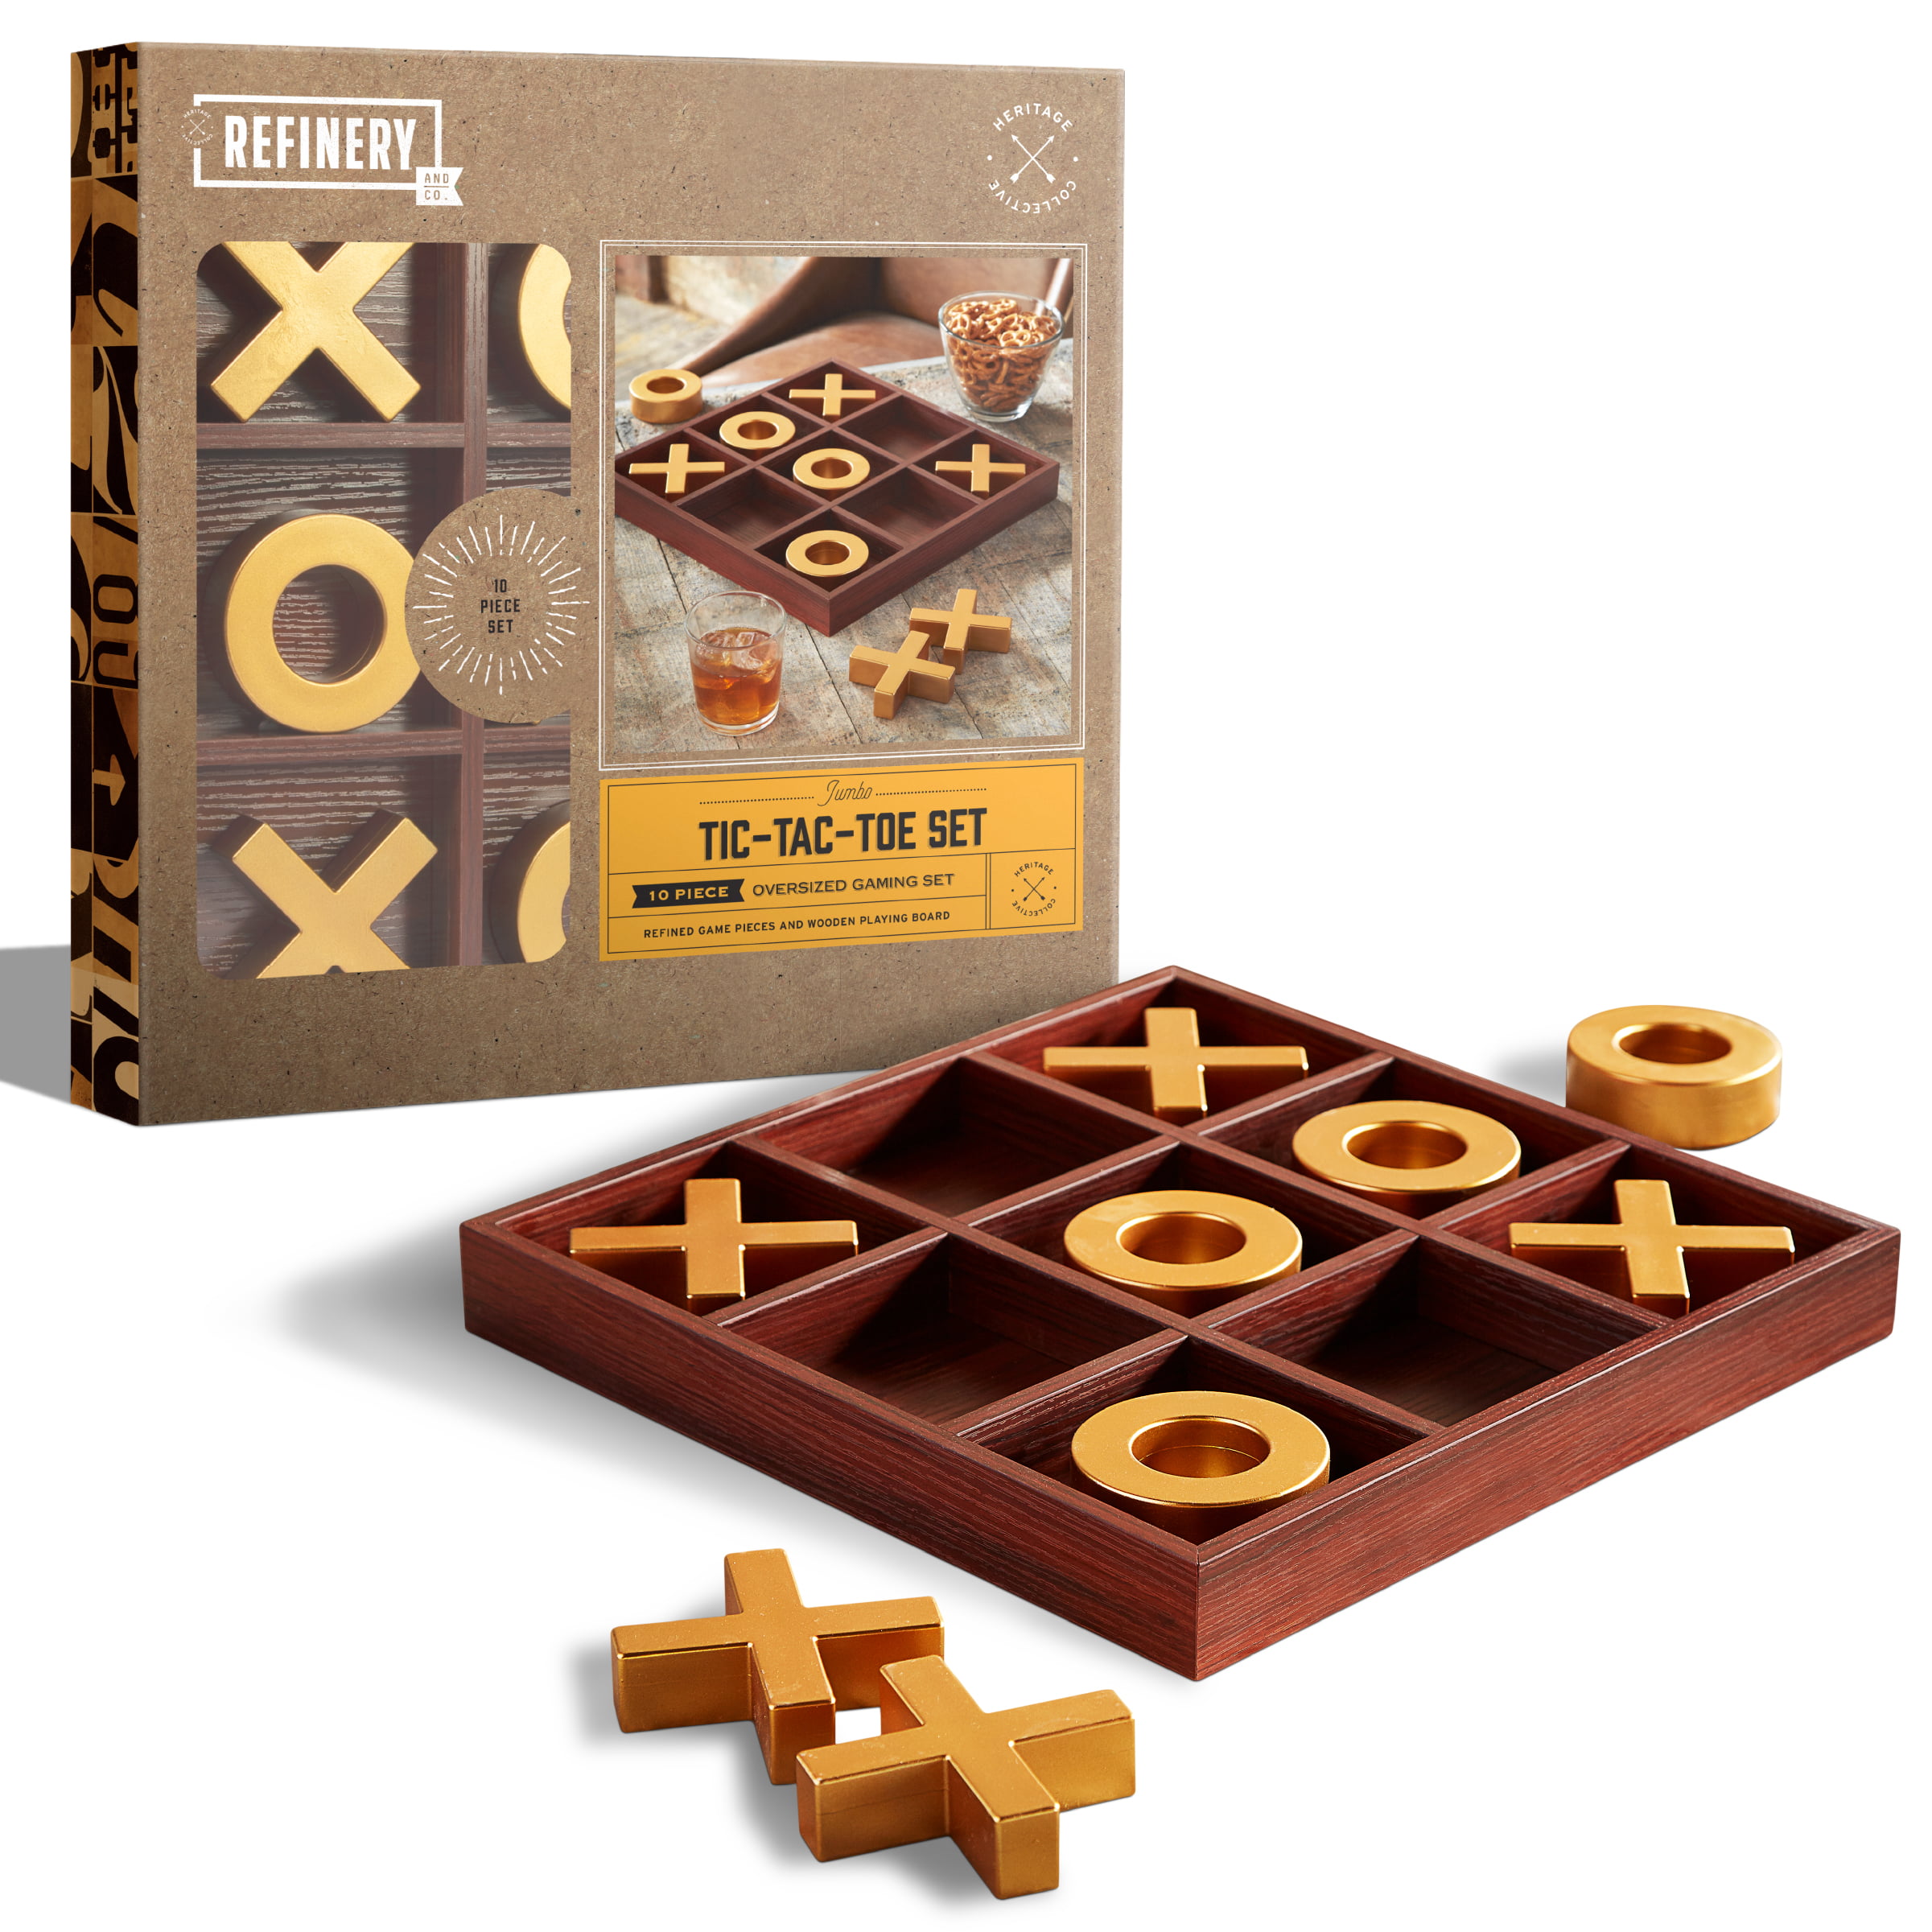 REFINERY AND CO. 10 Piece Premium Solid Wood Tic-Tac-Toe Board Game, Giant  Gold 14 Outdoor/Indoor Party Set Toy For Children/ Adults,